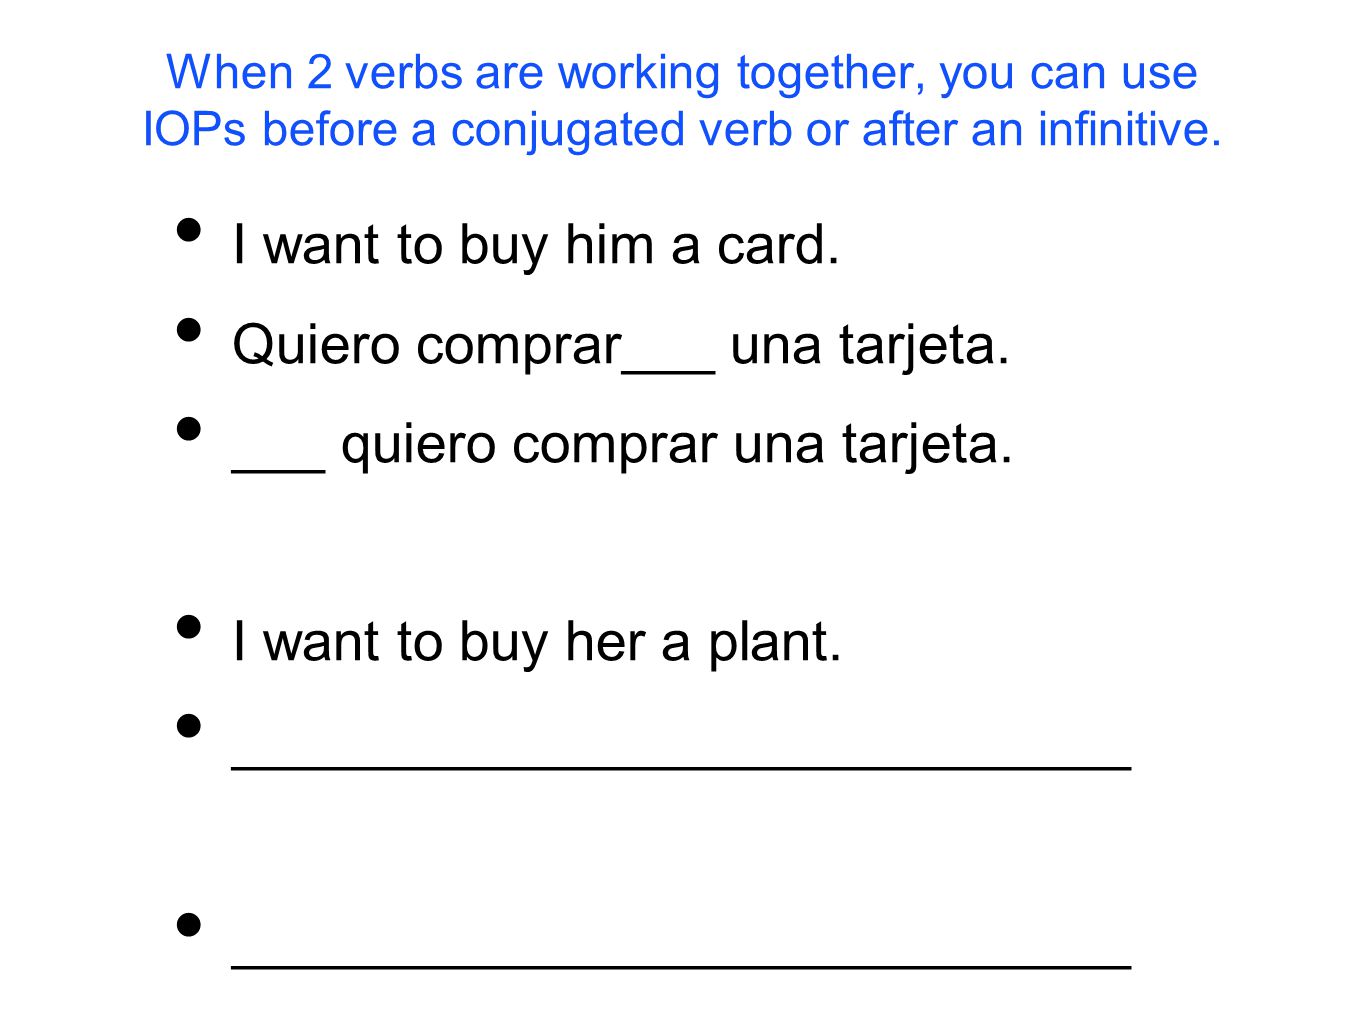 When 2 verbs are working together, you can use IOPs before a conjugated verb or after an infinitive.